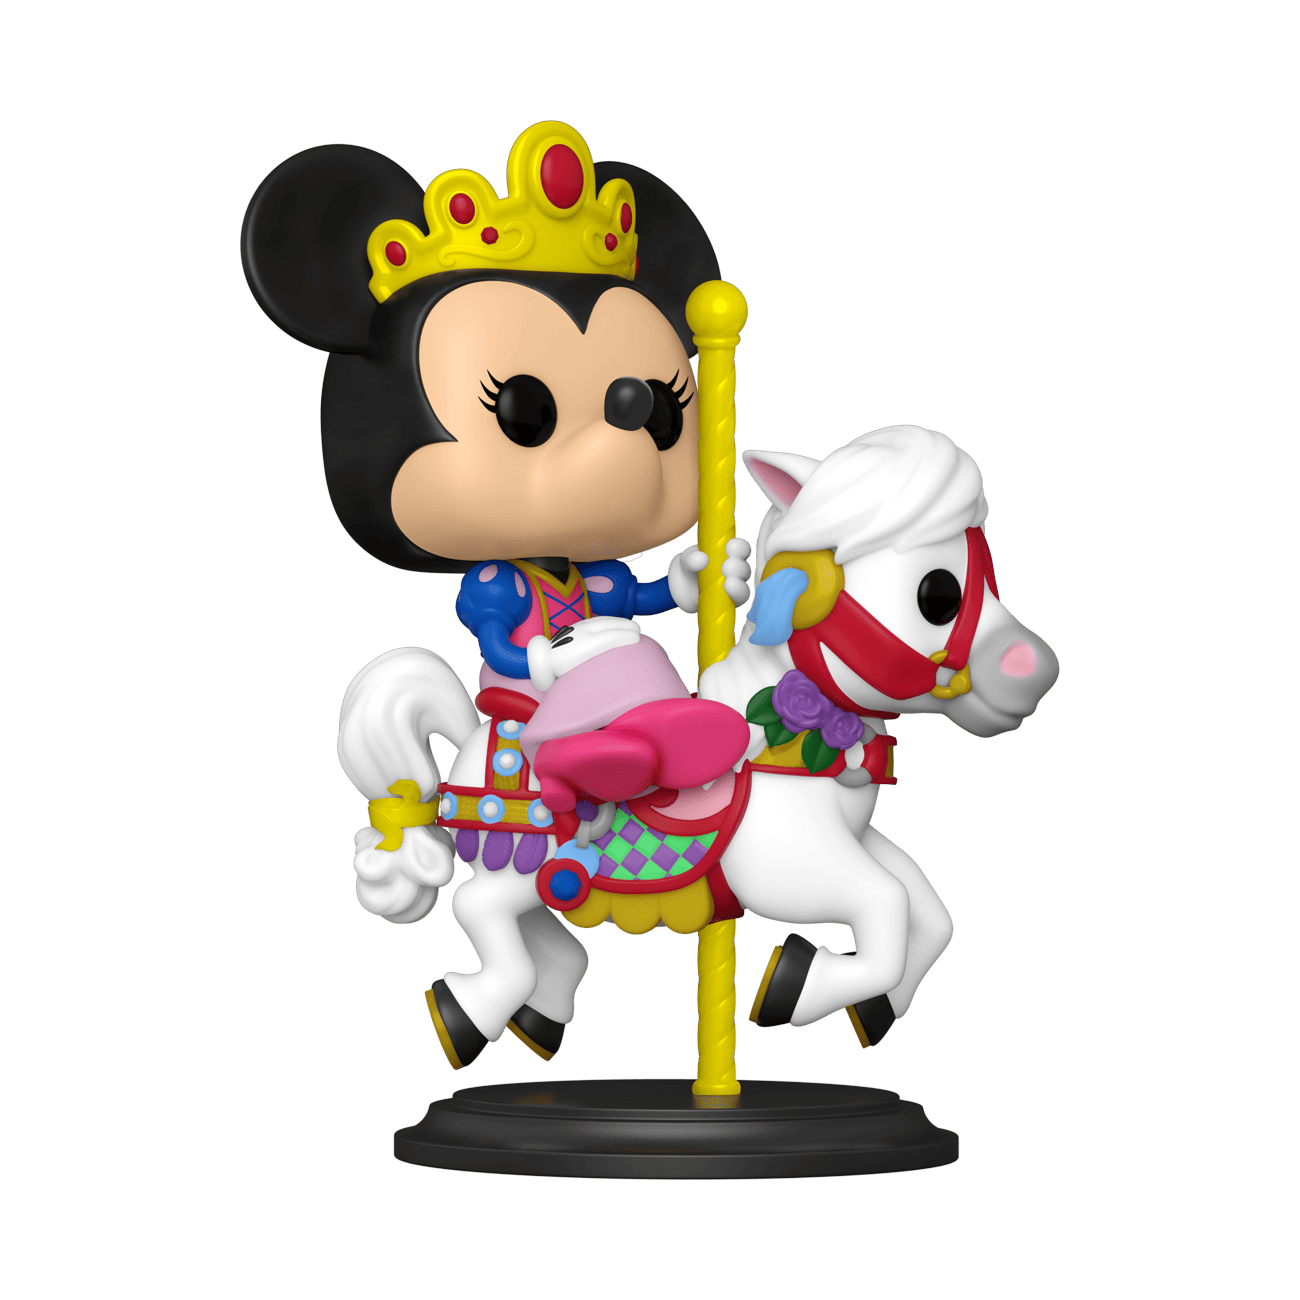 Buy Pop! Minnie Mouse on Prince Charming Regal Carrousel at Funko.